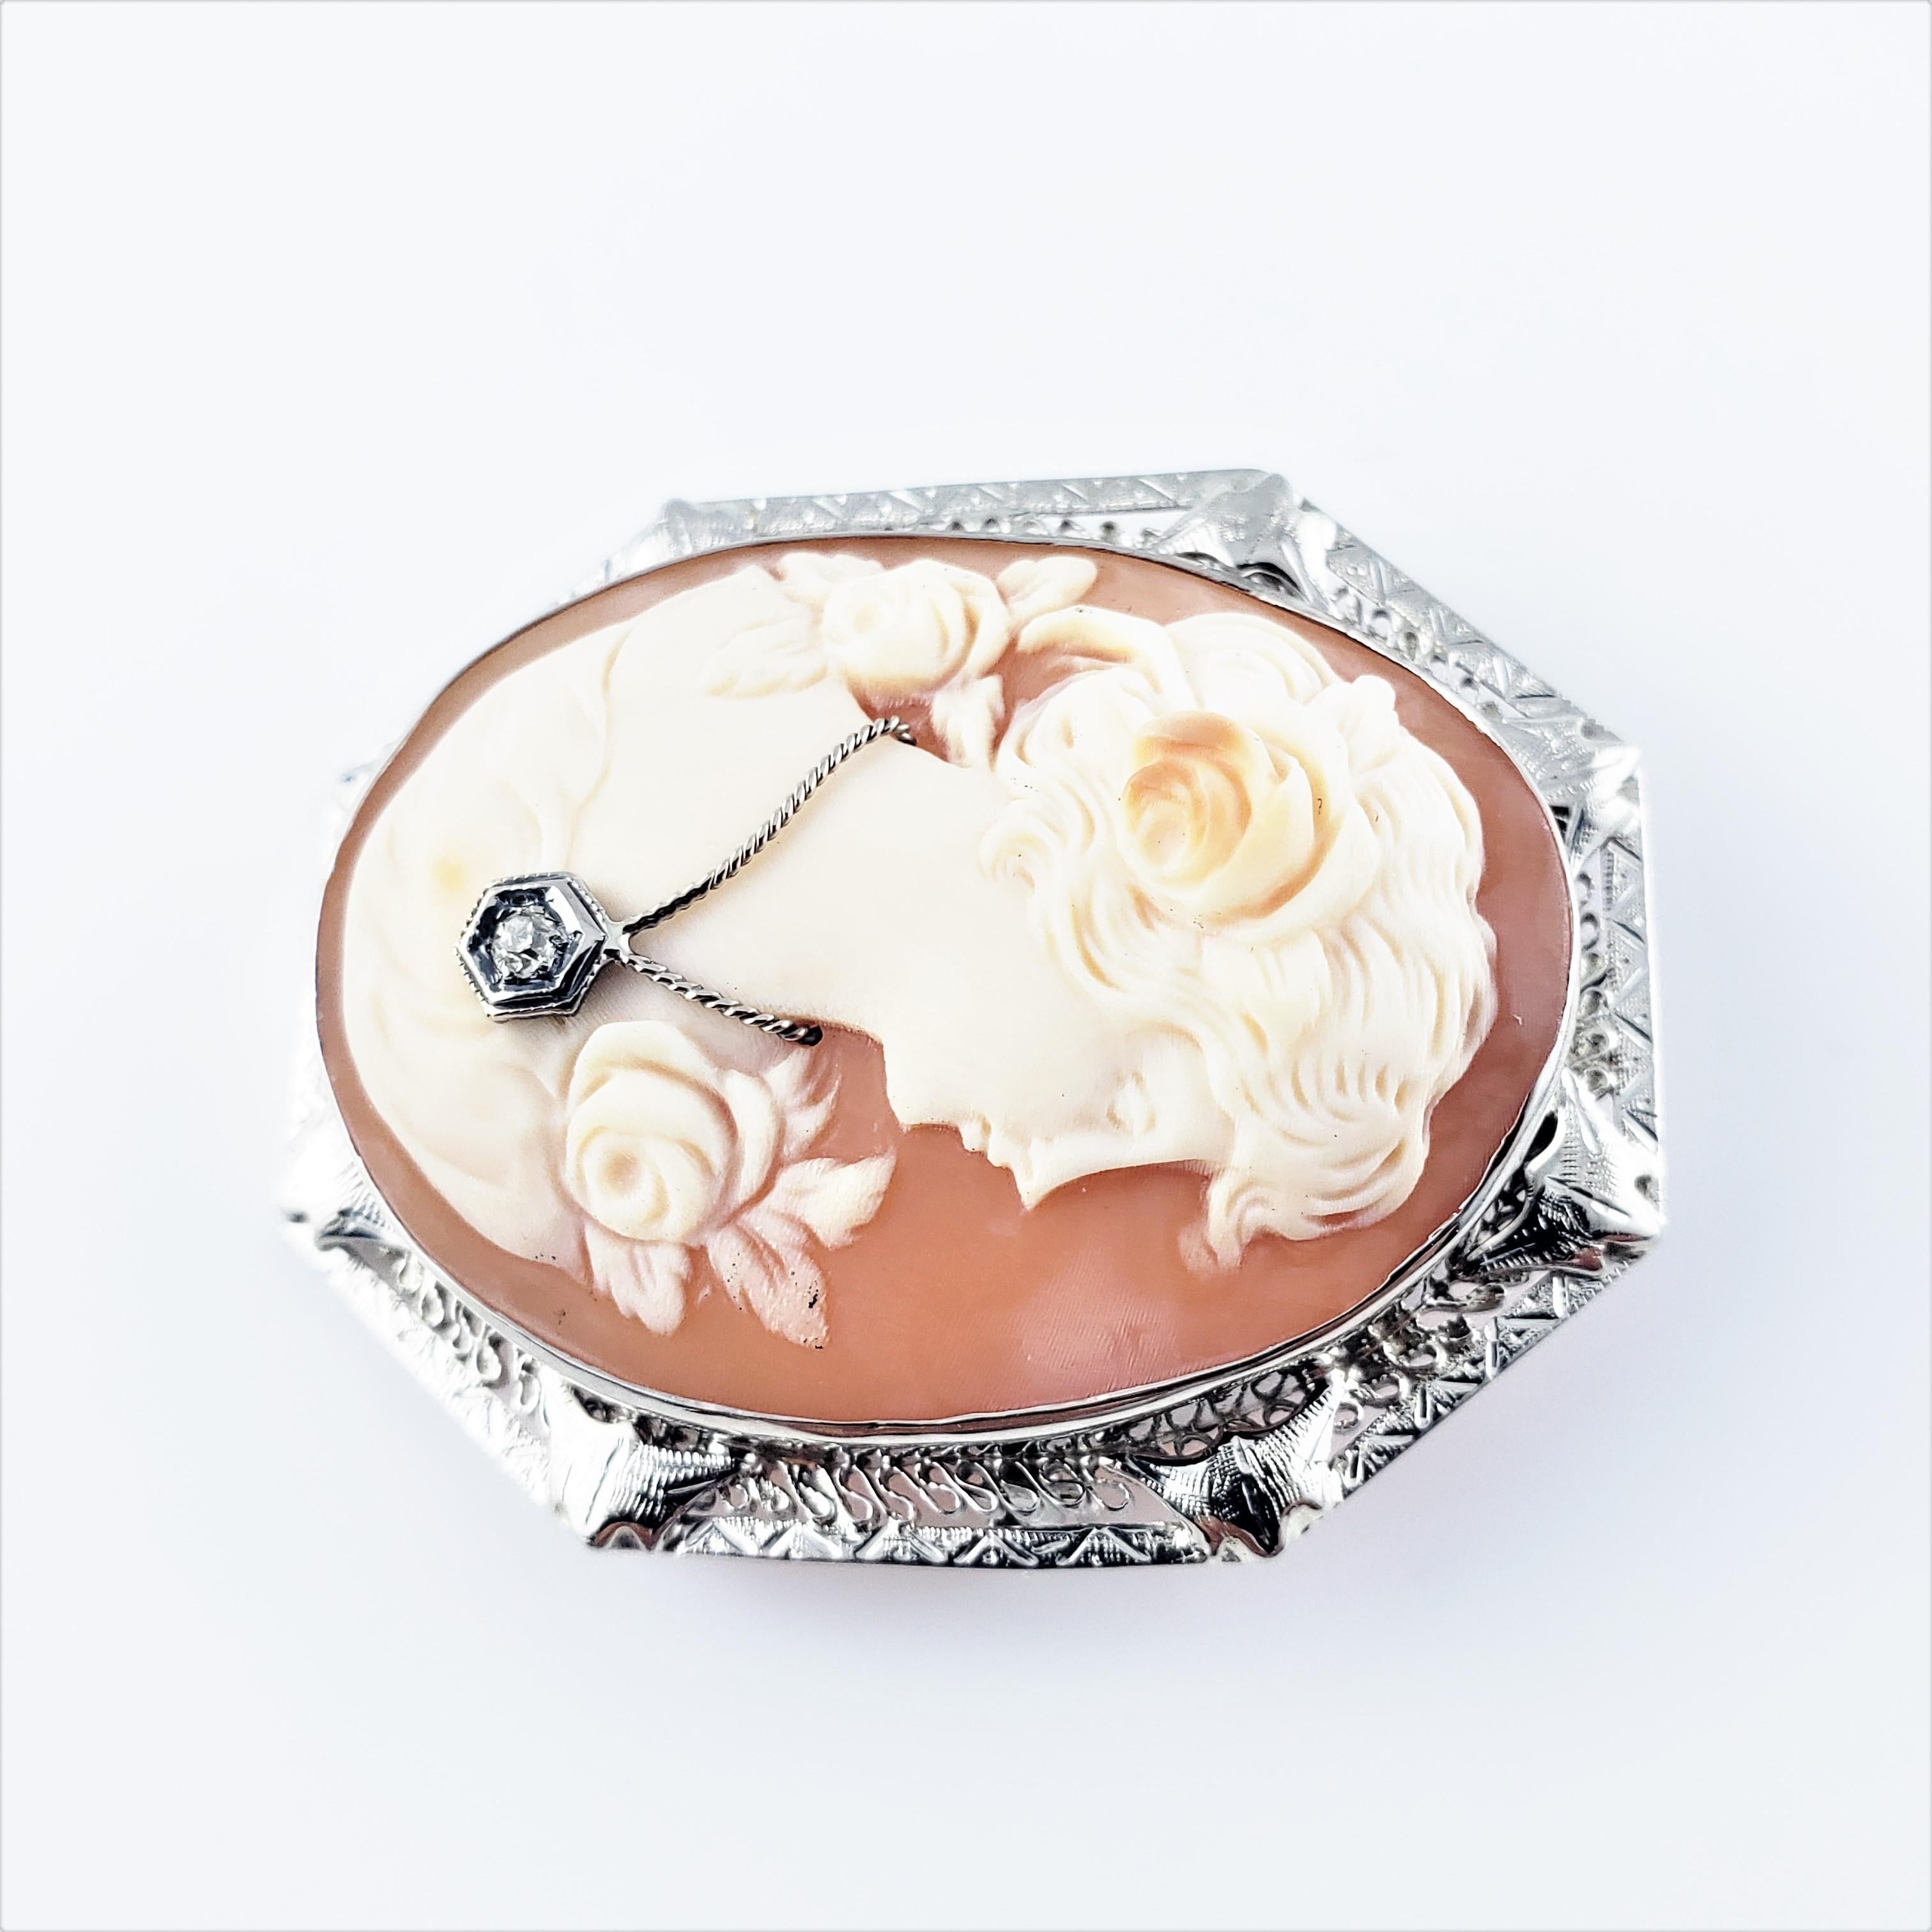 10 Karat White Gold Cameo Brooch/Pendant-

This stunning cameo features a lovely lady in profile framed in beautifully detailed 10K white gold filigree.  Accented with one round single cut diamond.  Can be worn as a brooch or a pendant.

*Chain not